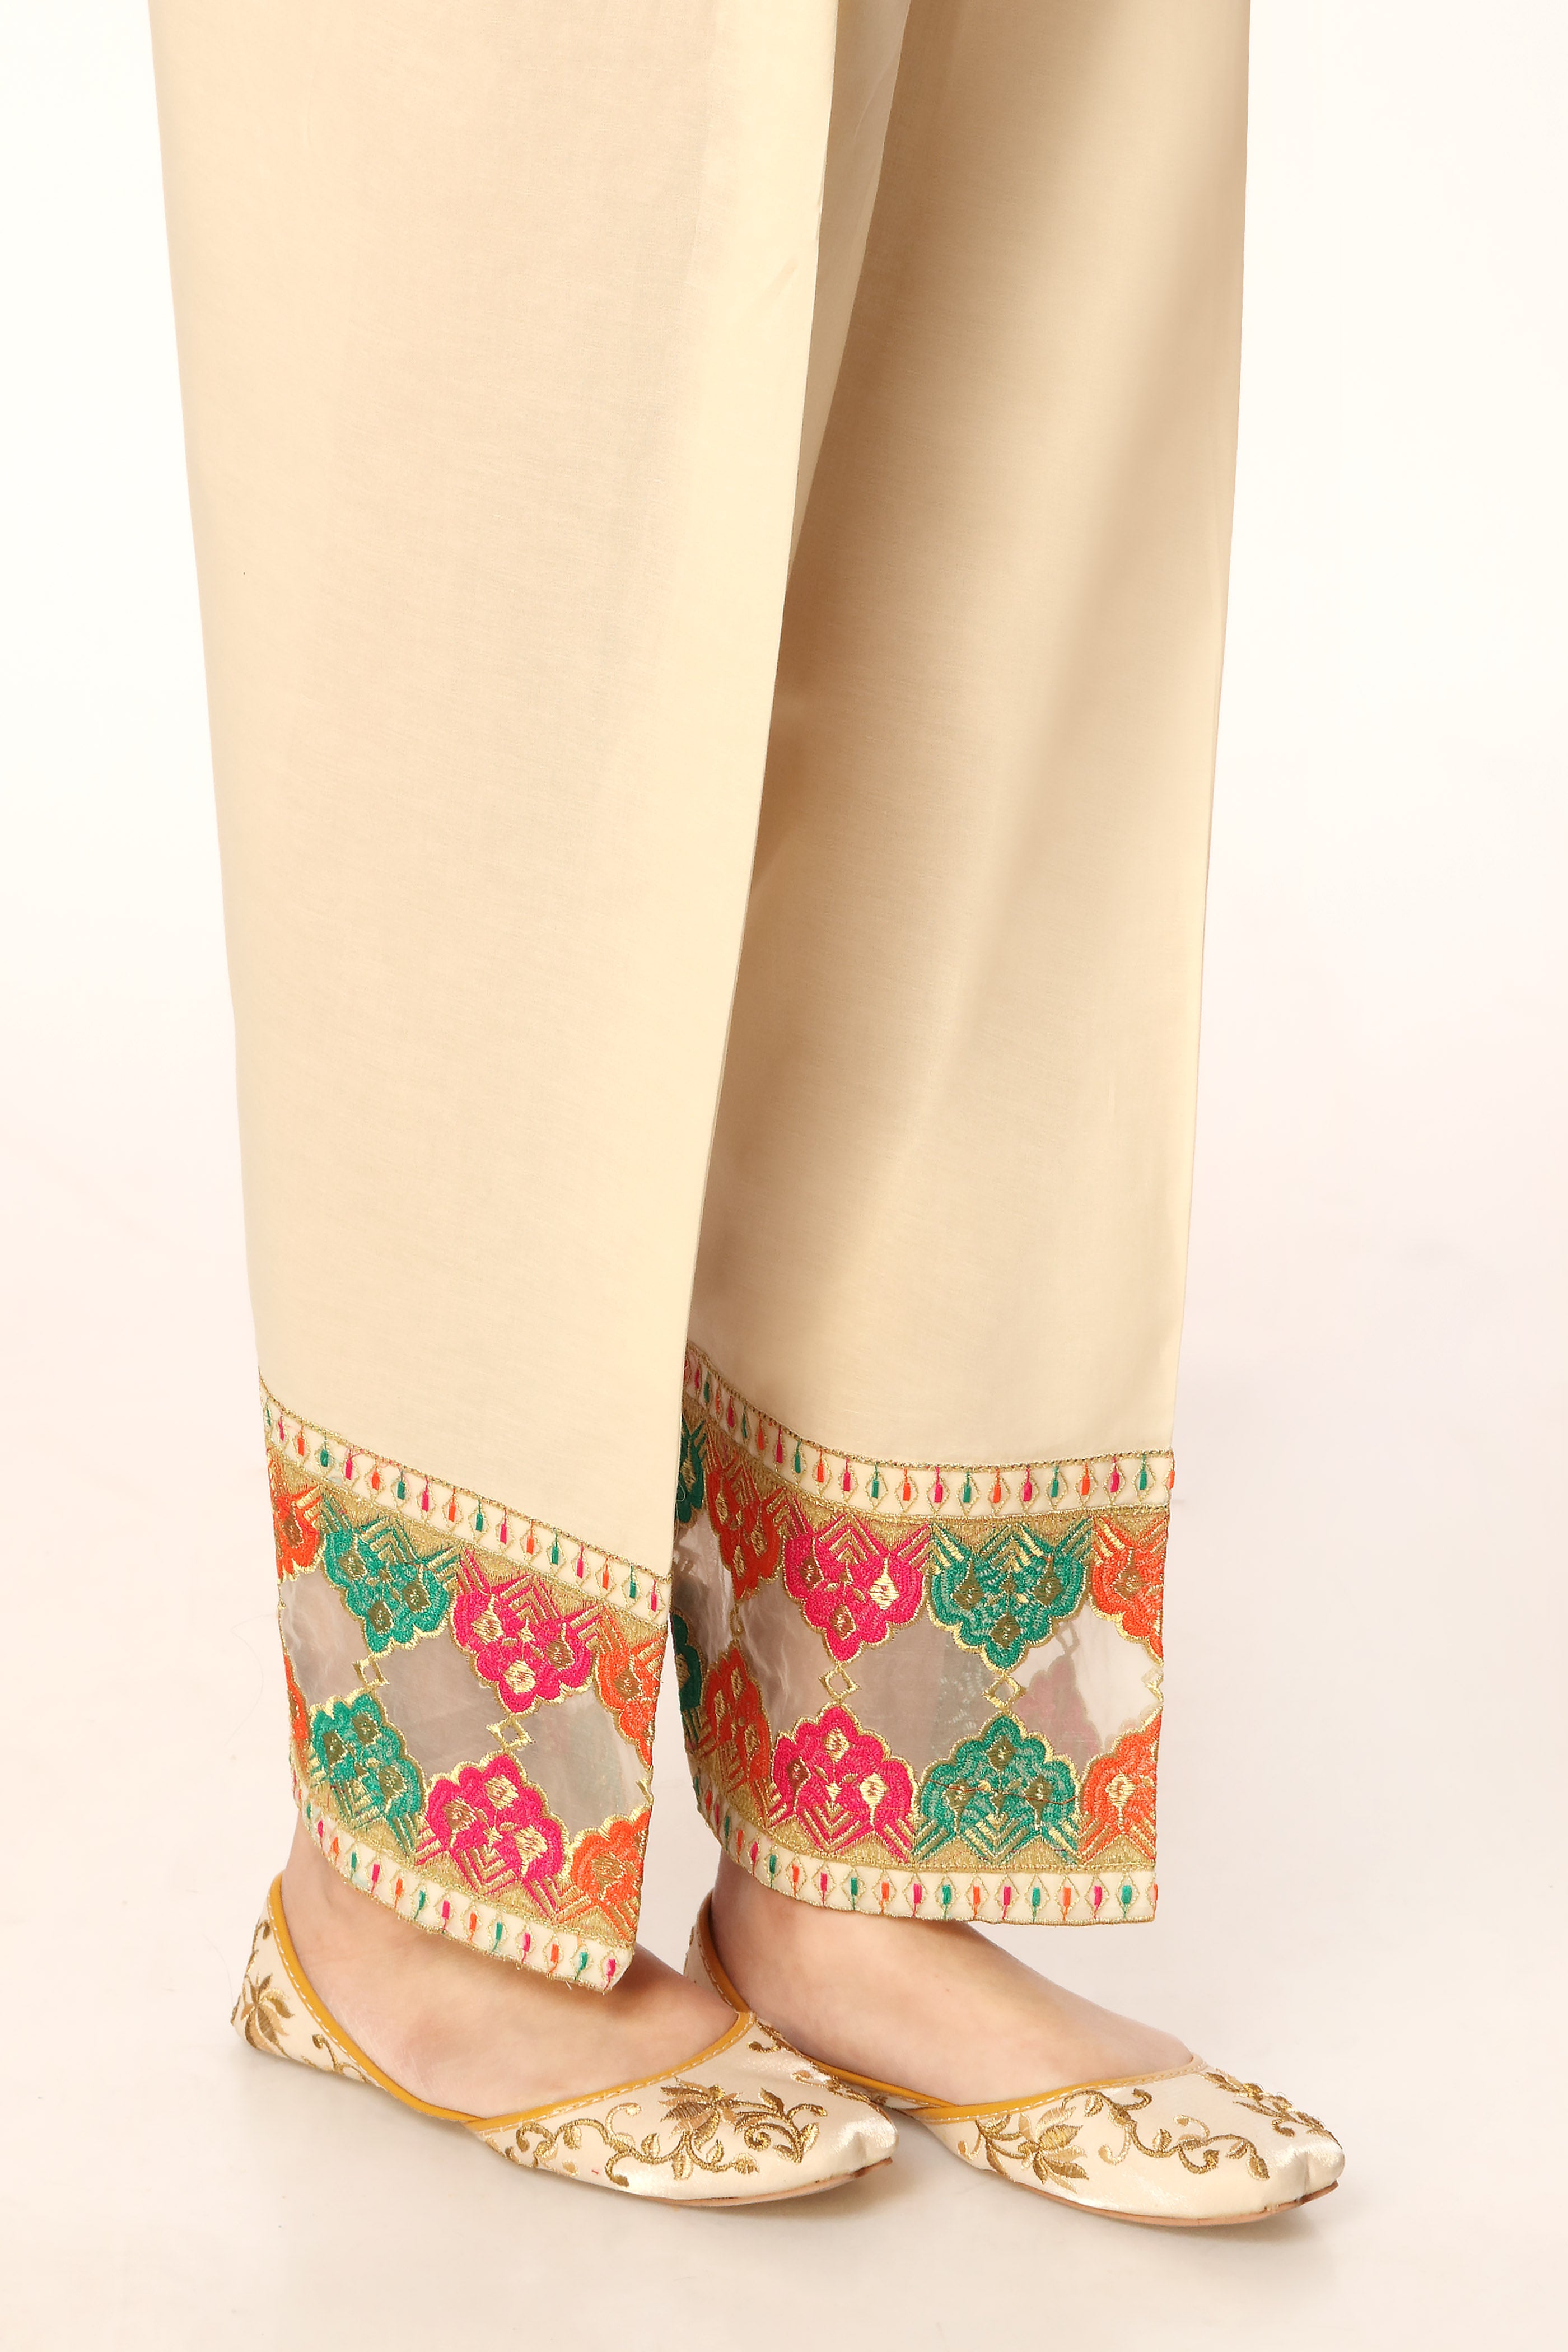 Organza Shalwar in Off White coloured Printed Lawn fabric 3